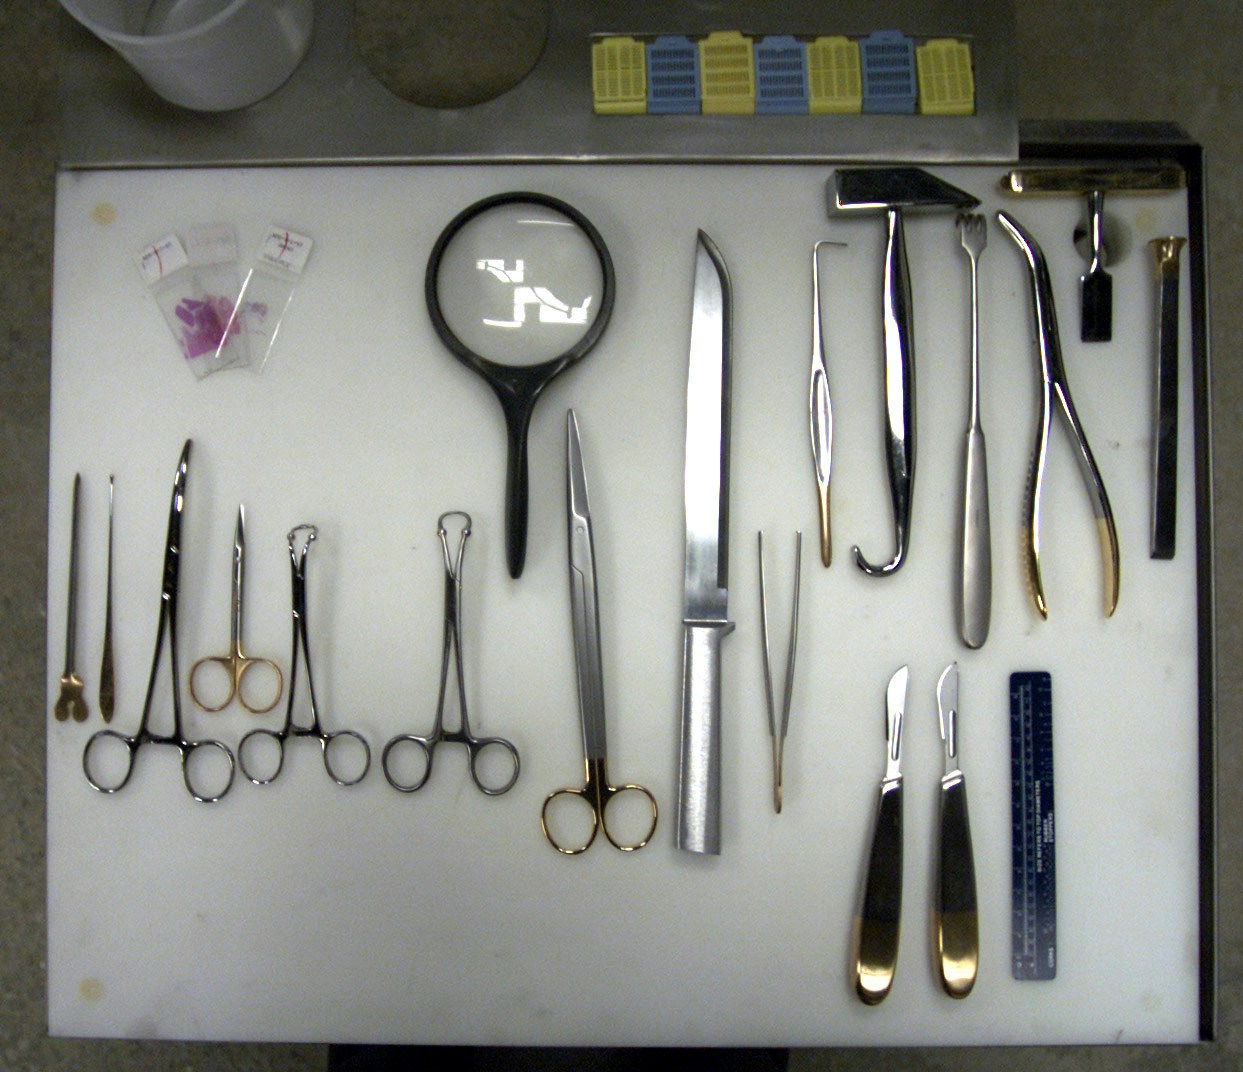 Some of the tools used to perform an autopsy.